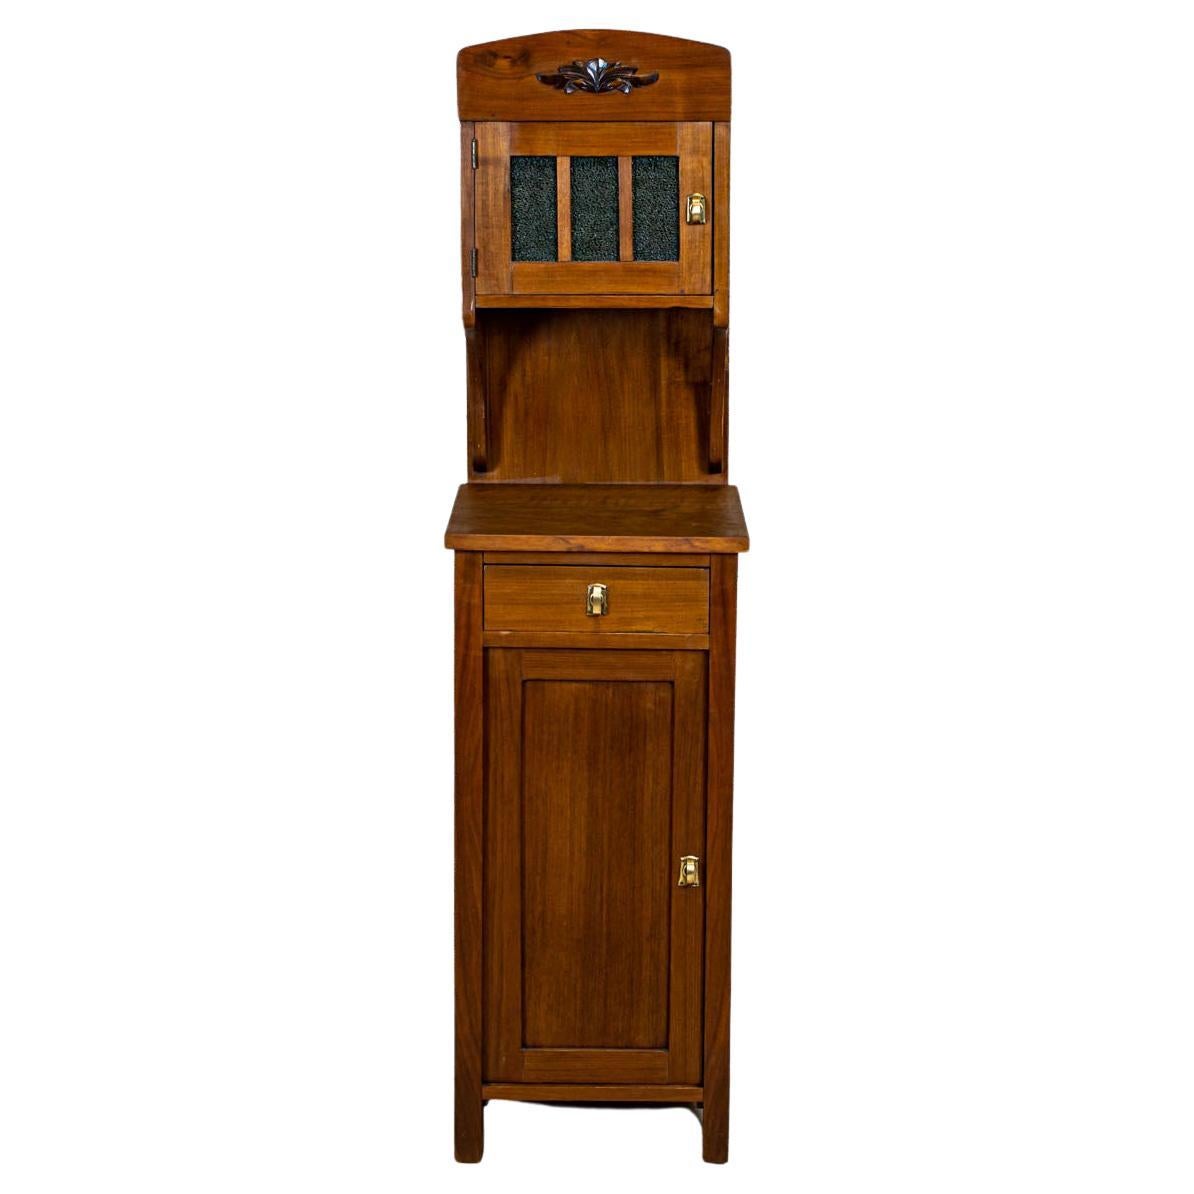 Art Nouveau Walnut Nightstand from the Early 20th Century with Glass Pane For Sale